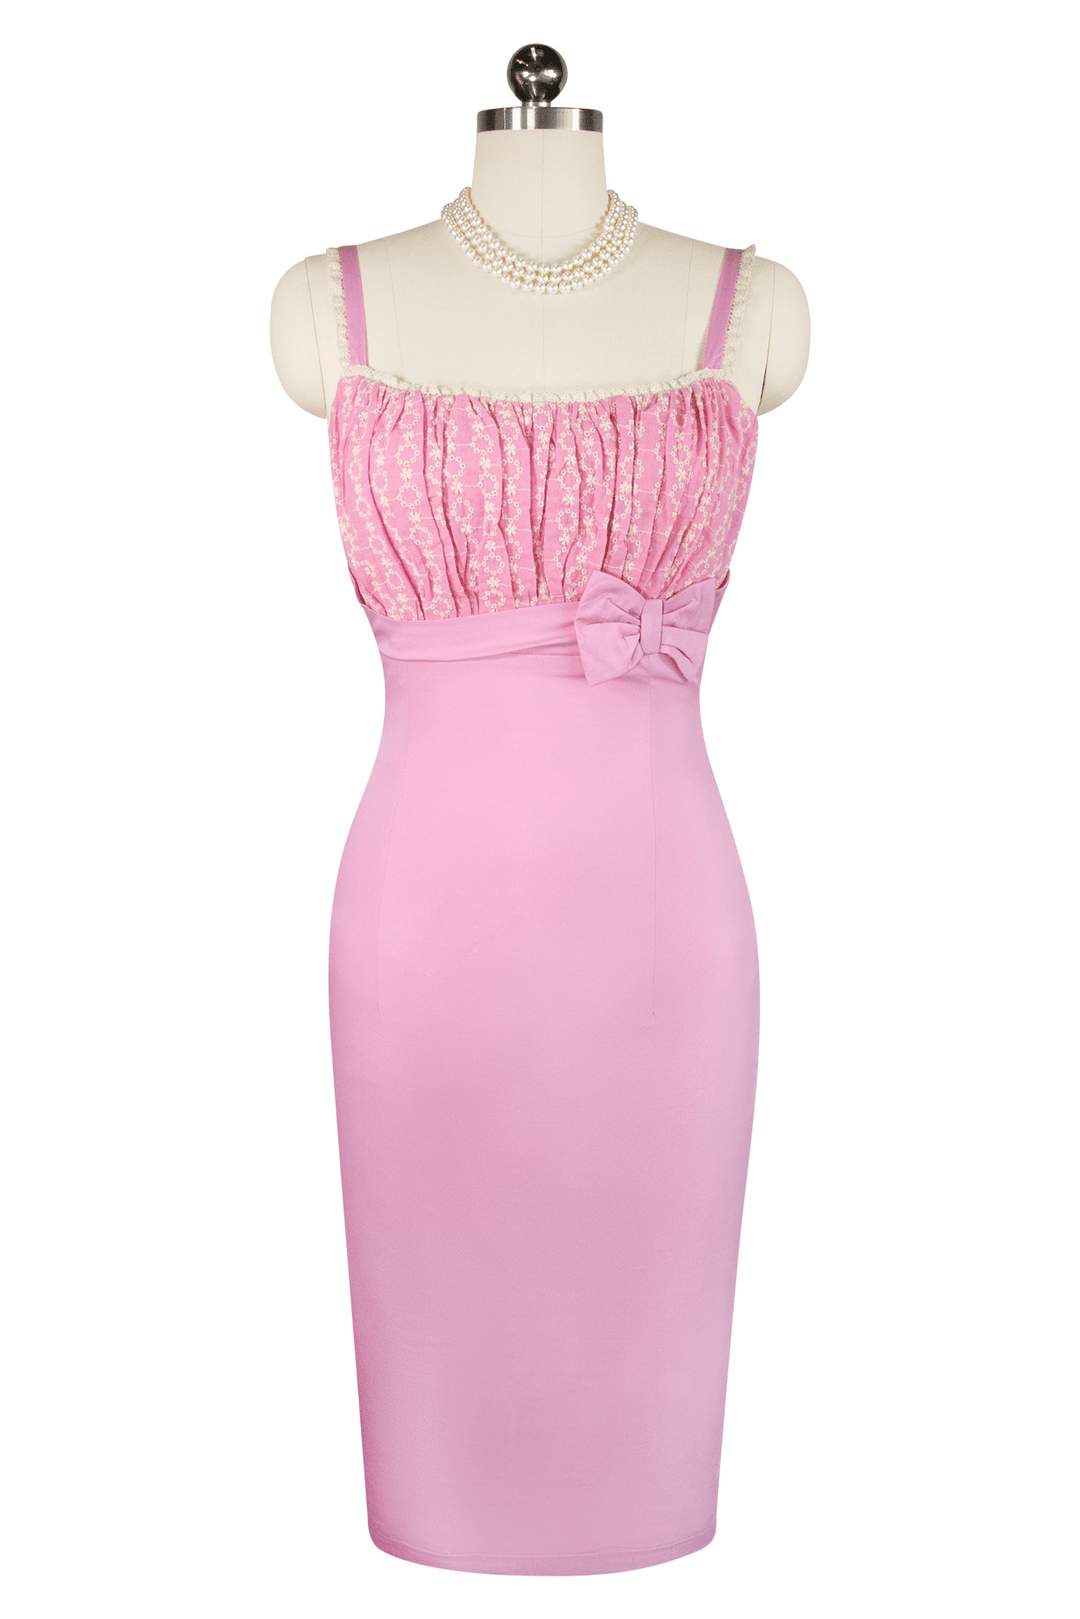 French Vacation Wiggle Dress - Kitten D'Amour